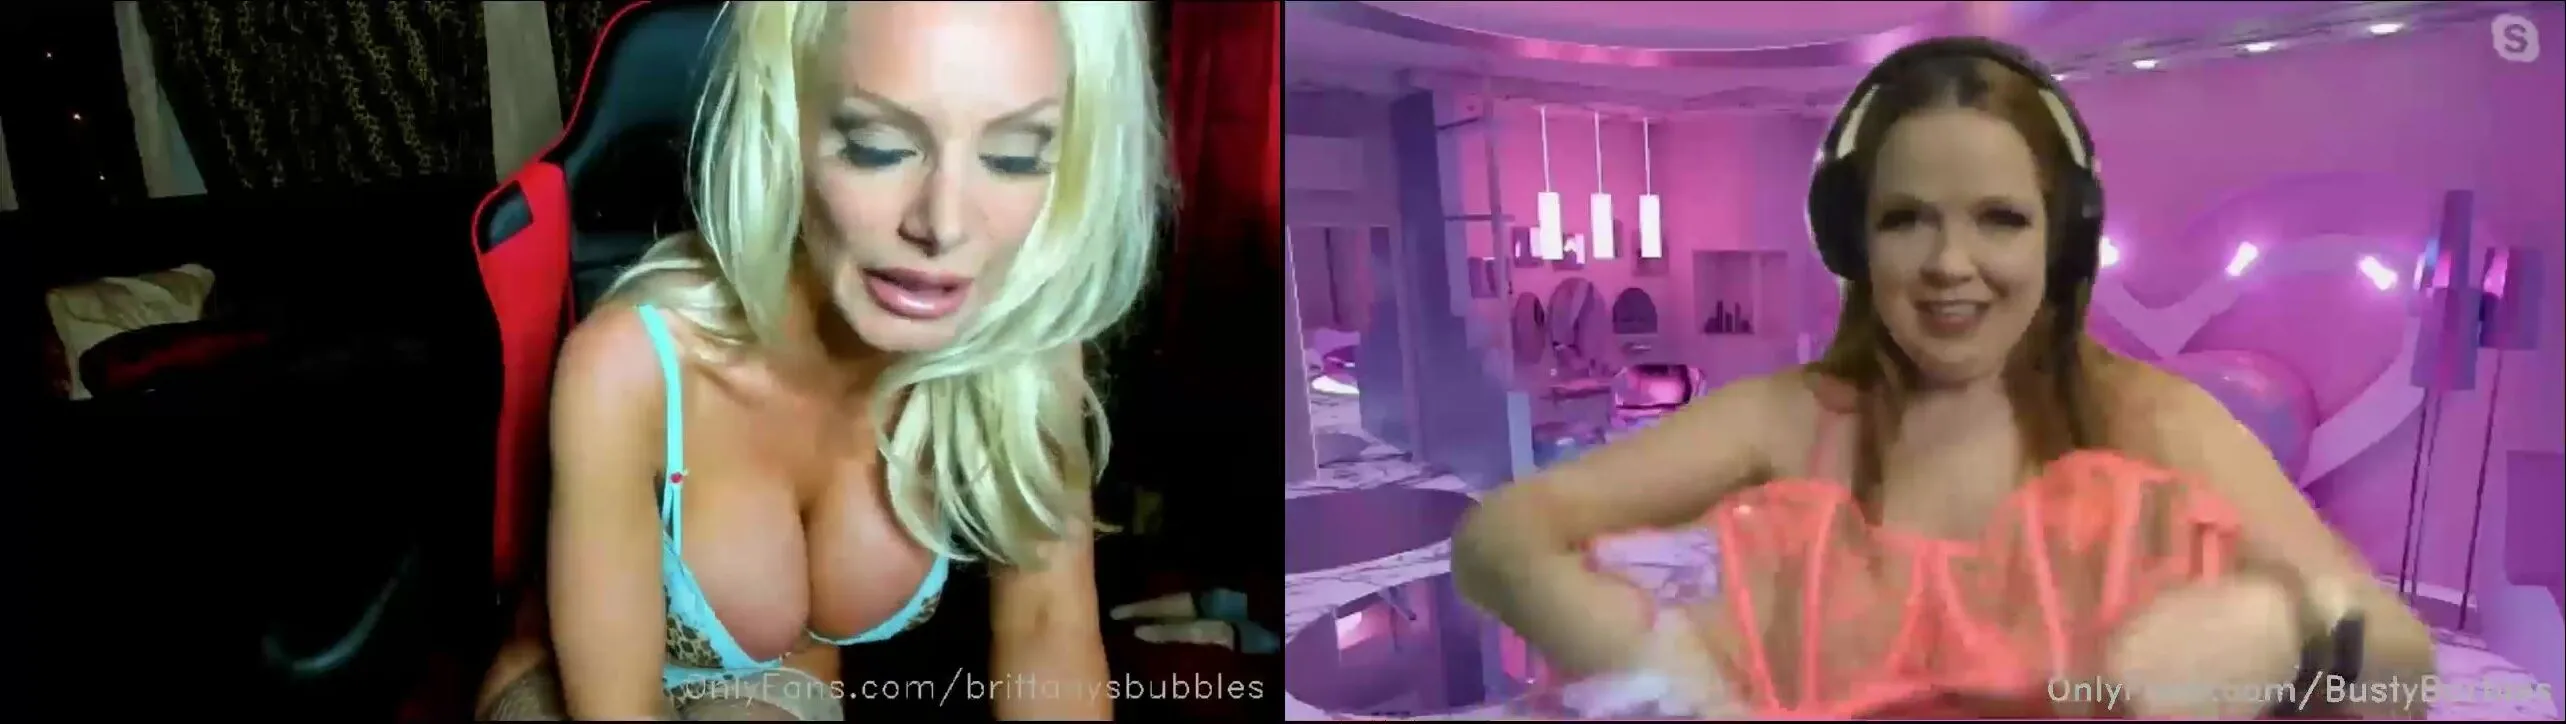 Xxx Caxe Vodo - Brittany andrews hey my little sluts here s the video in case you missed  our live fridate earlier today. xxx onlyfans porn video